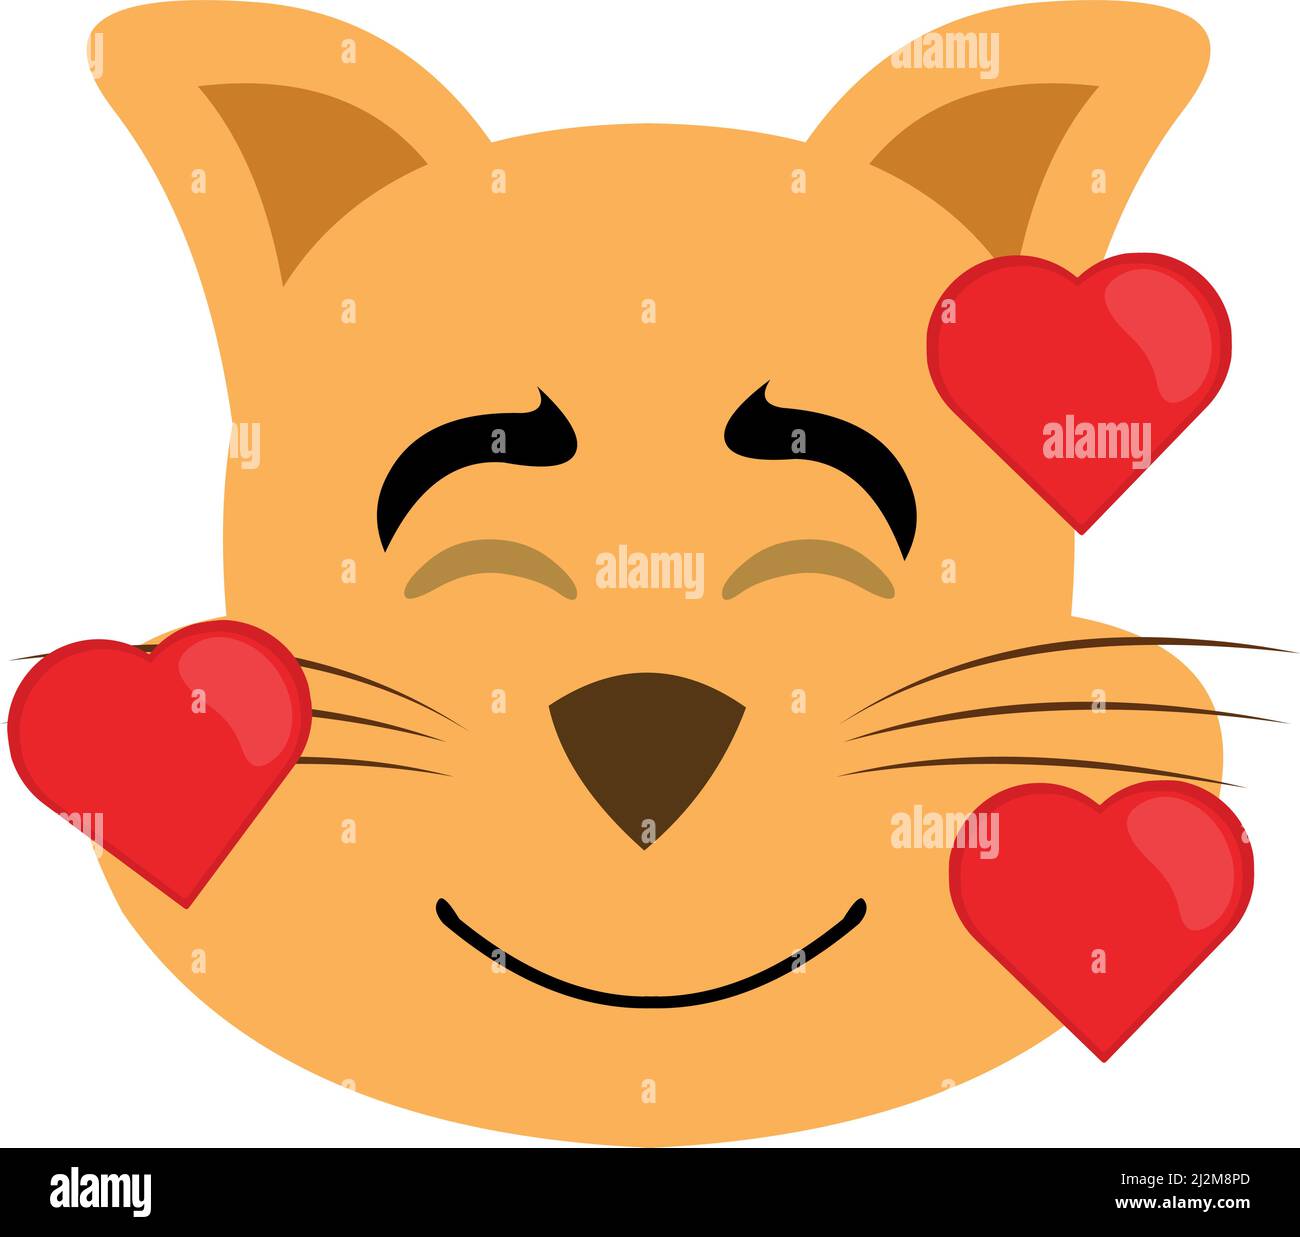 Cat Lover Heart Stock Vector Illustration and Royalty Free Cat Lover Heart  Clipart